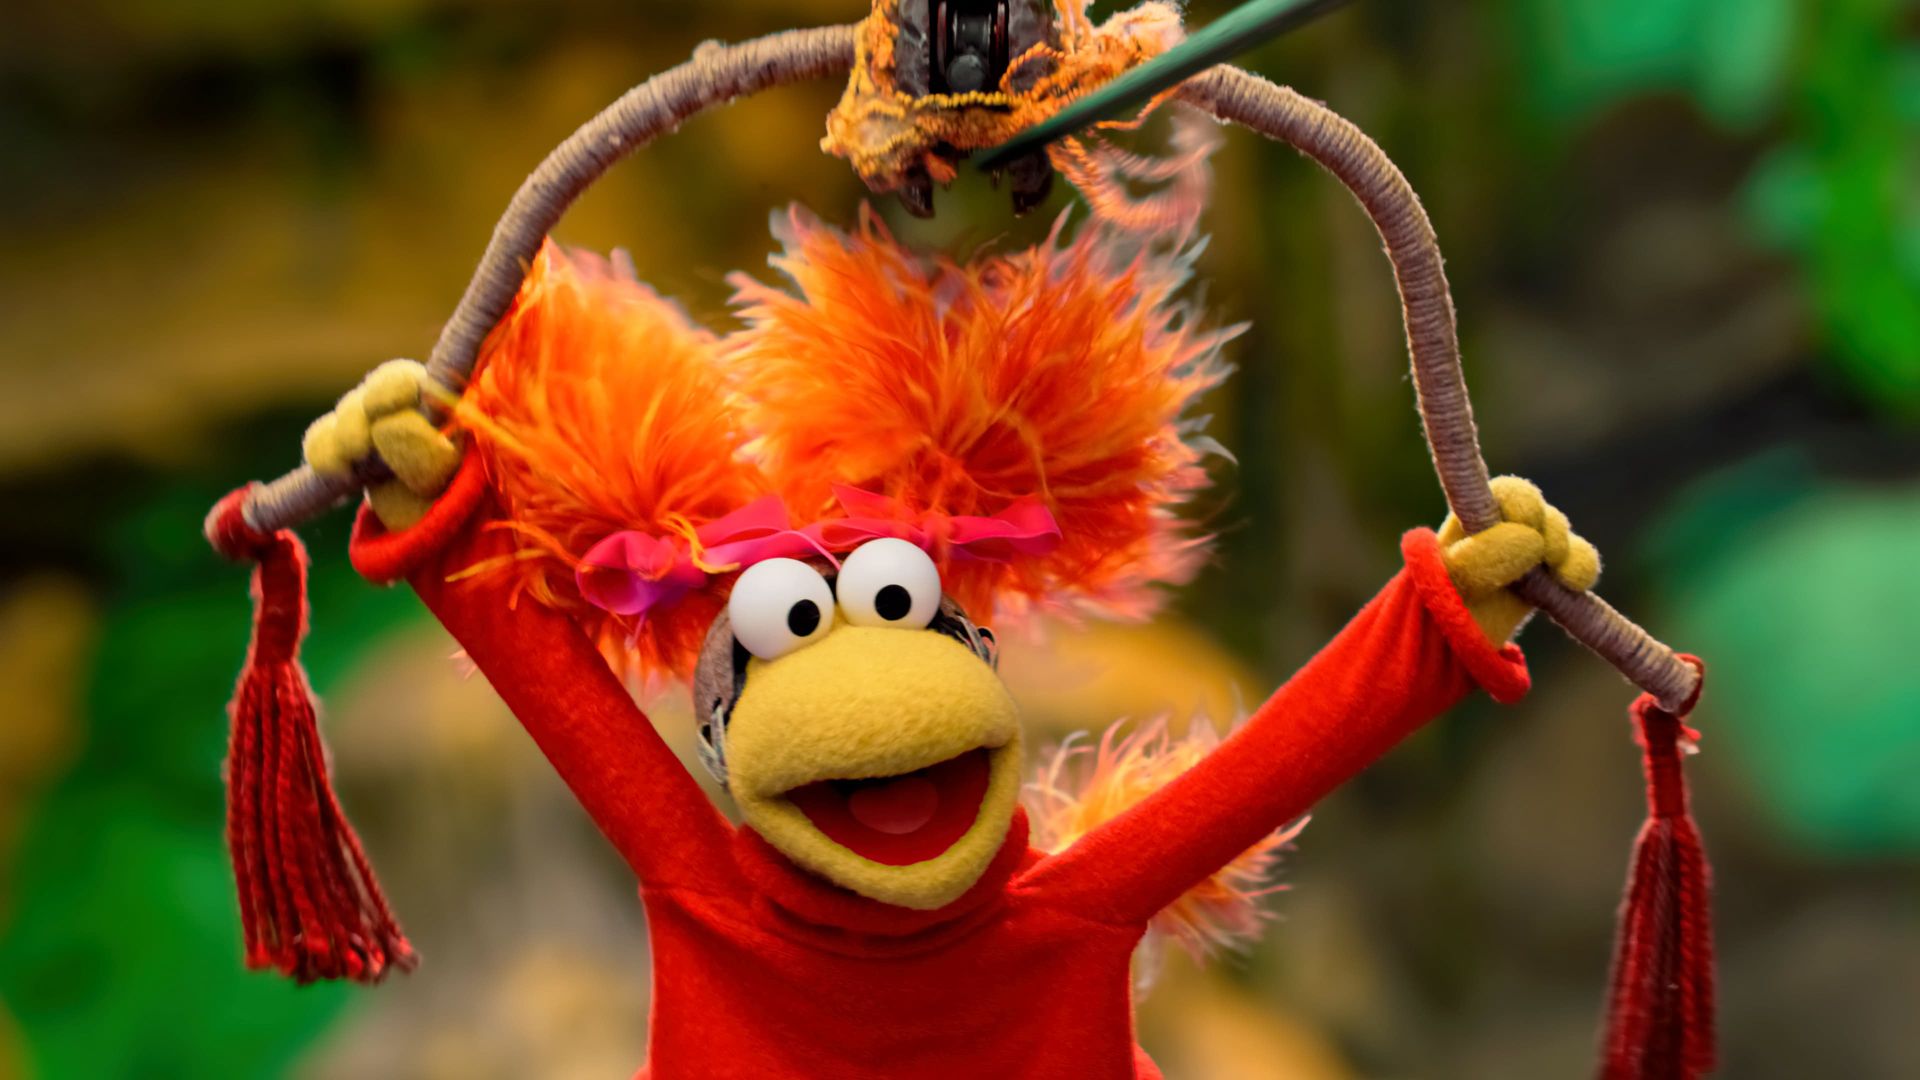 Fraggle Rock: Back to the Rock background